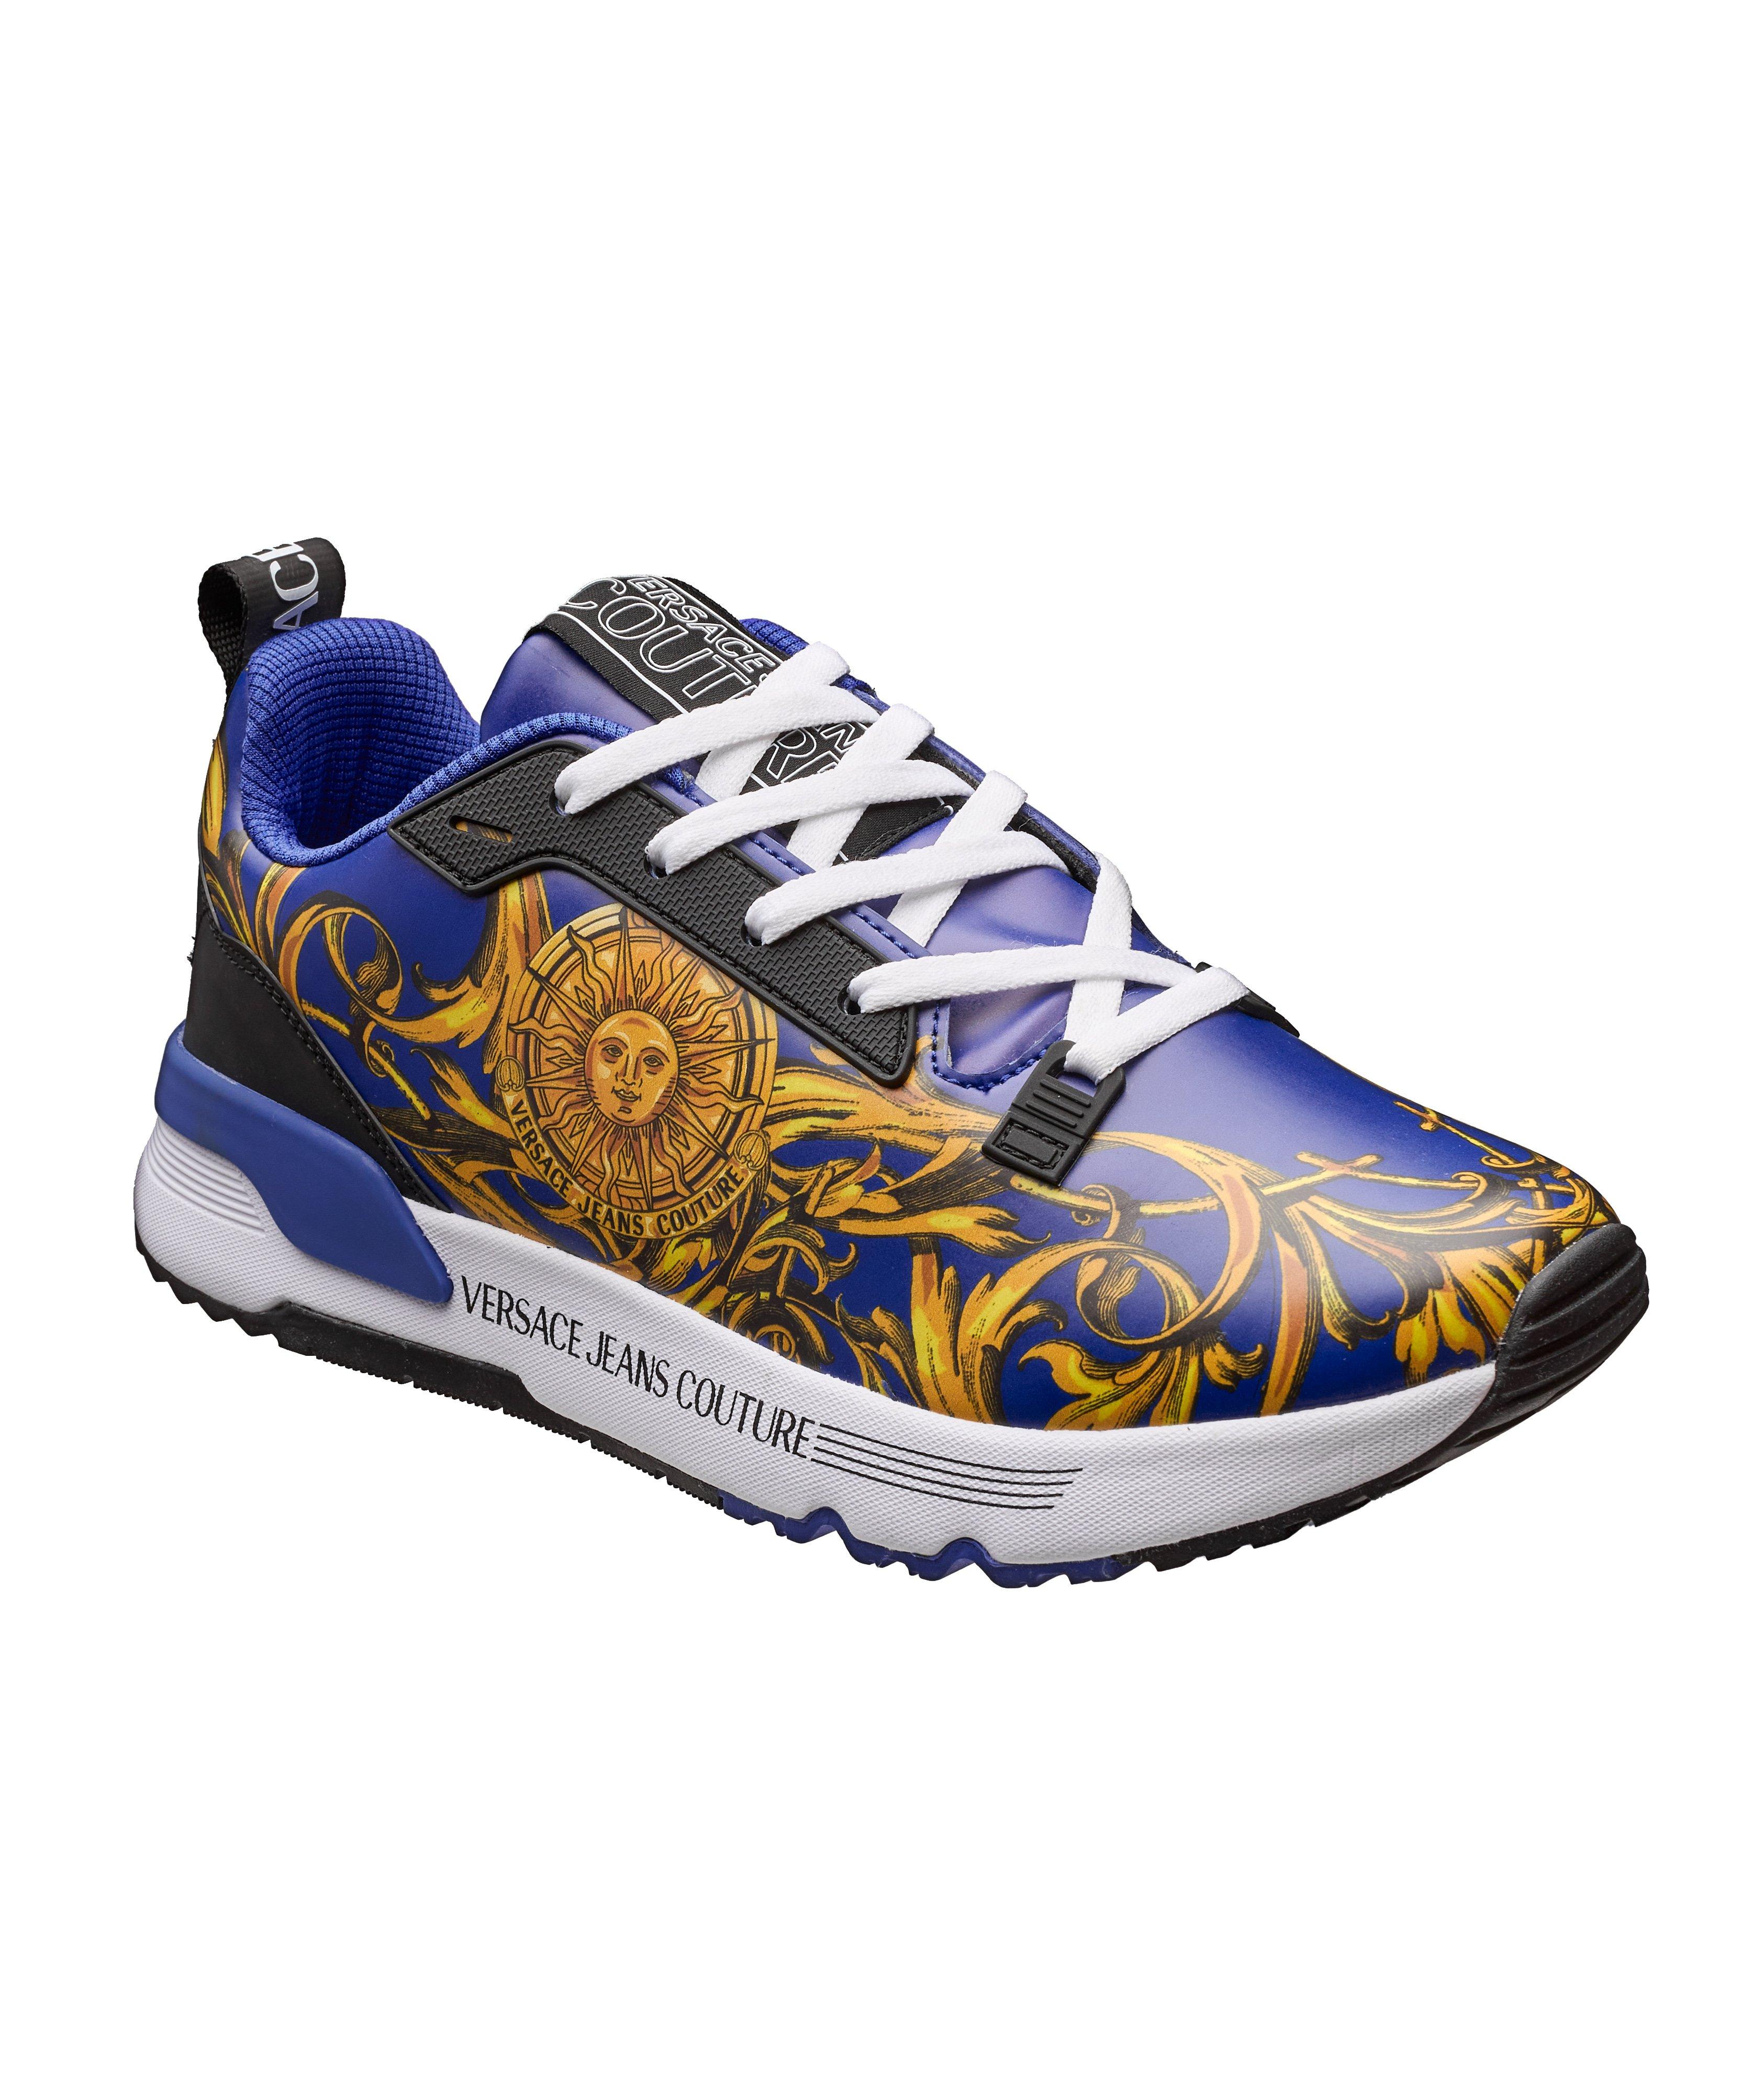 Dynamic Sun Baroque Sneakers image 0